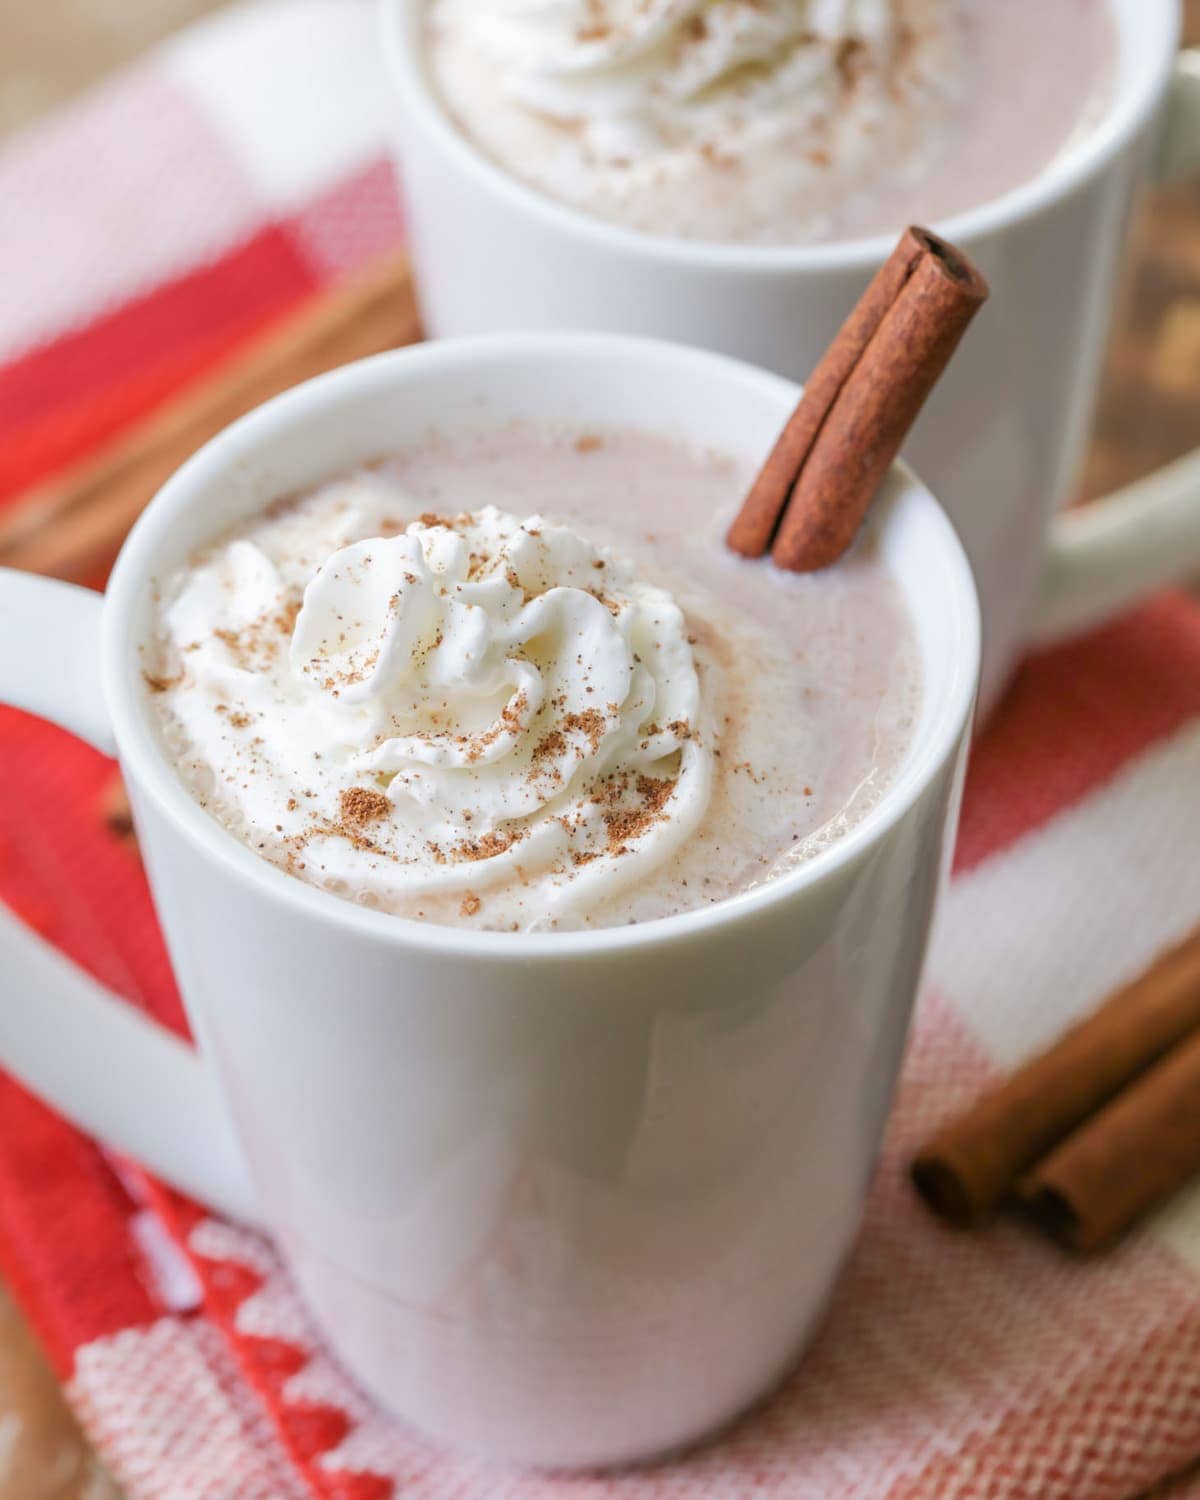 Serve spritz cookies with mexican hot chocolate.